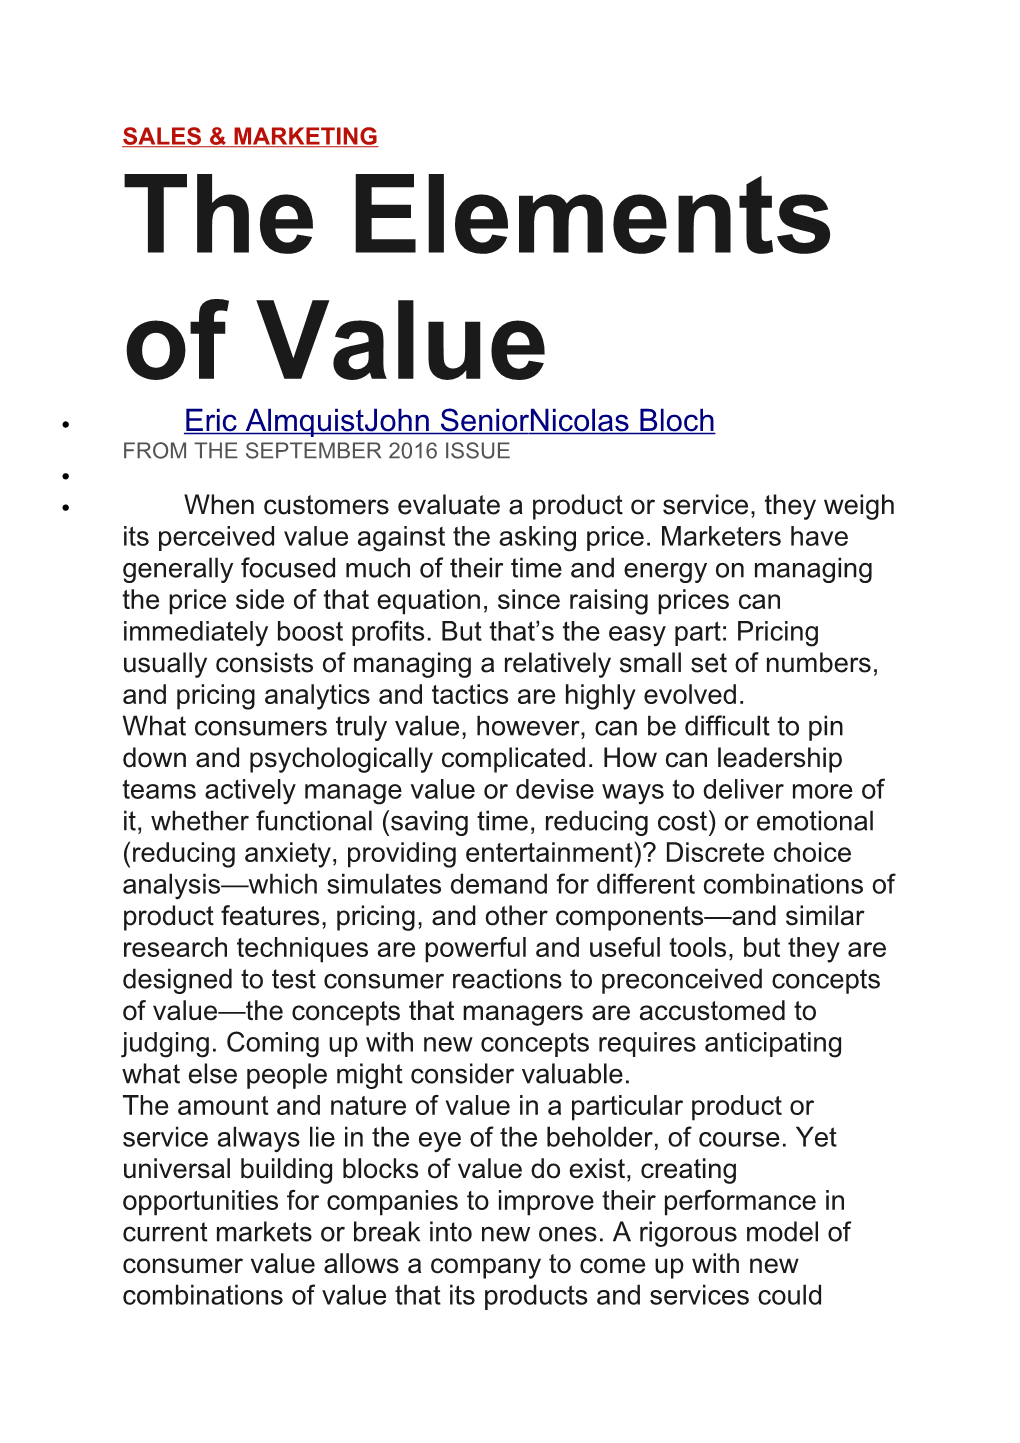 The Elements of Value